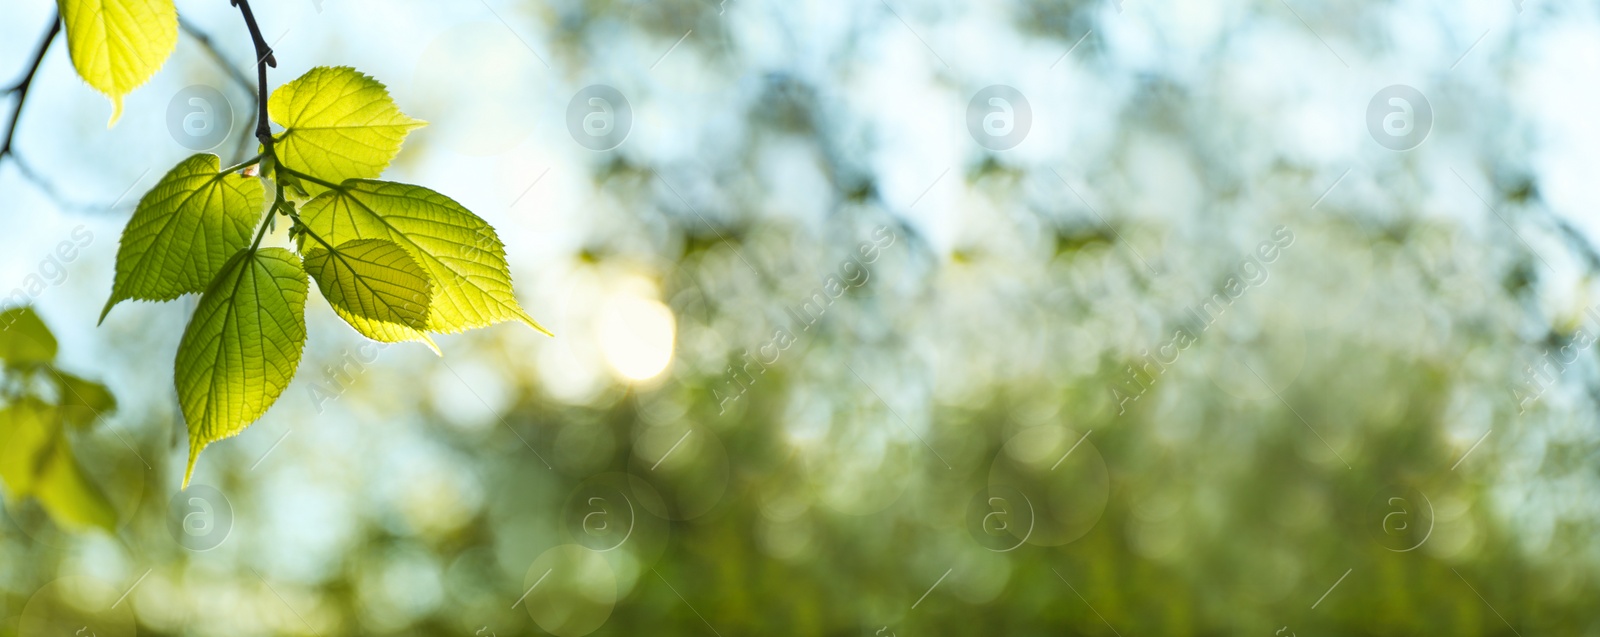 Image of Tree branch with green leaves on sunny day. Springtime